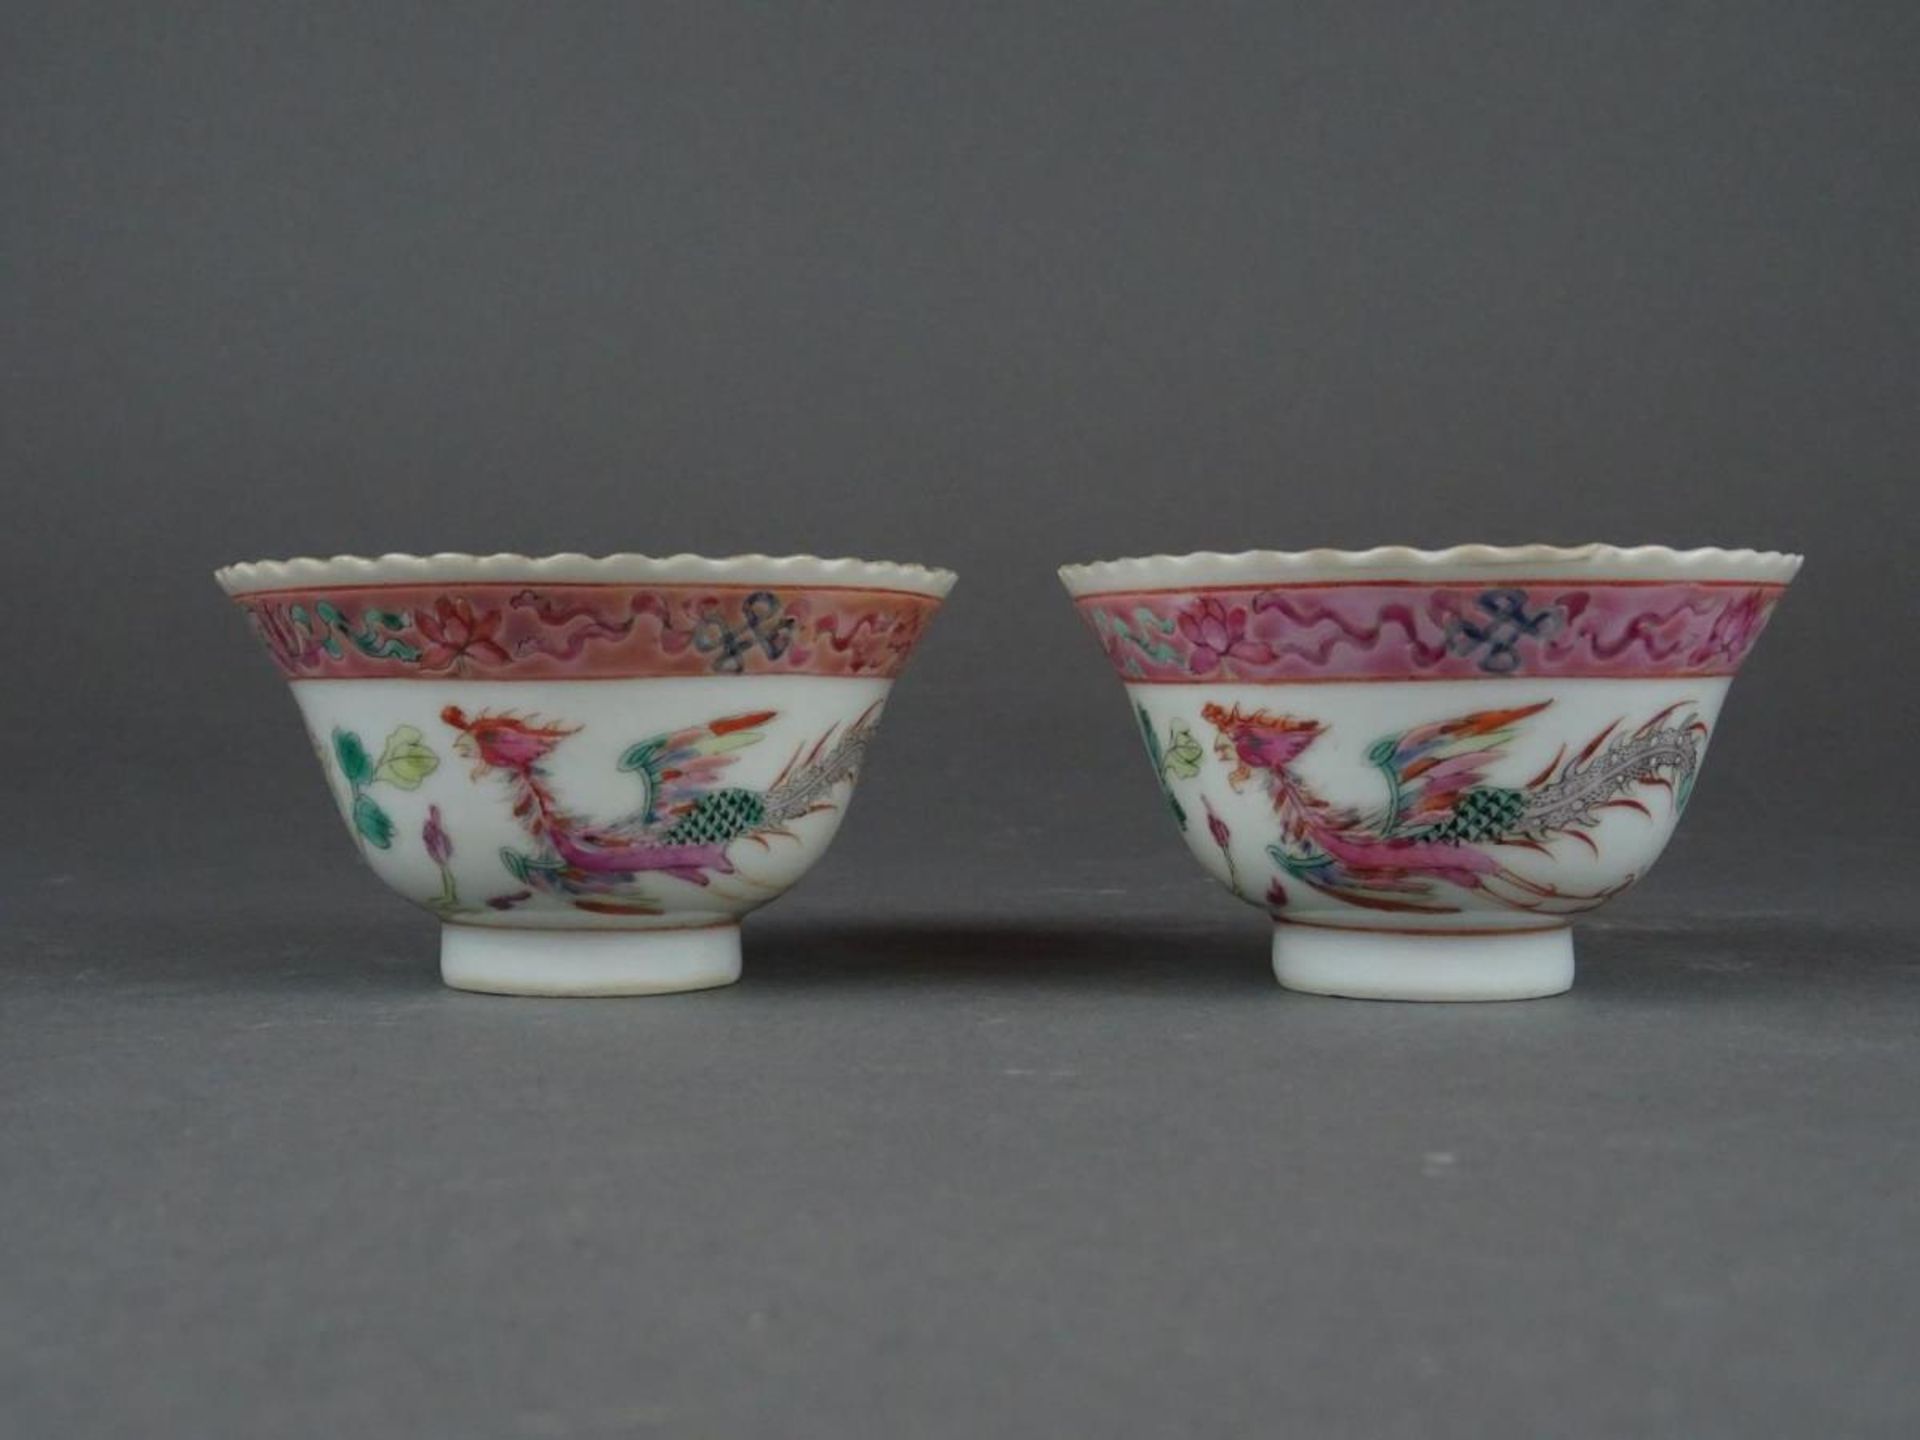 Two Famille rose cups